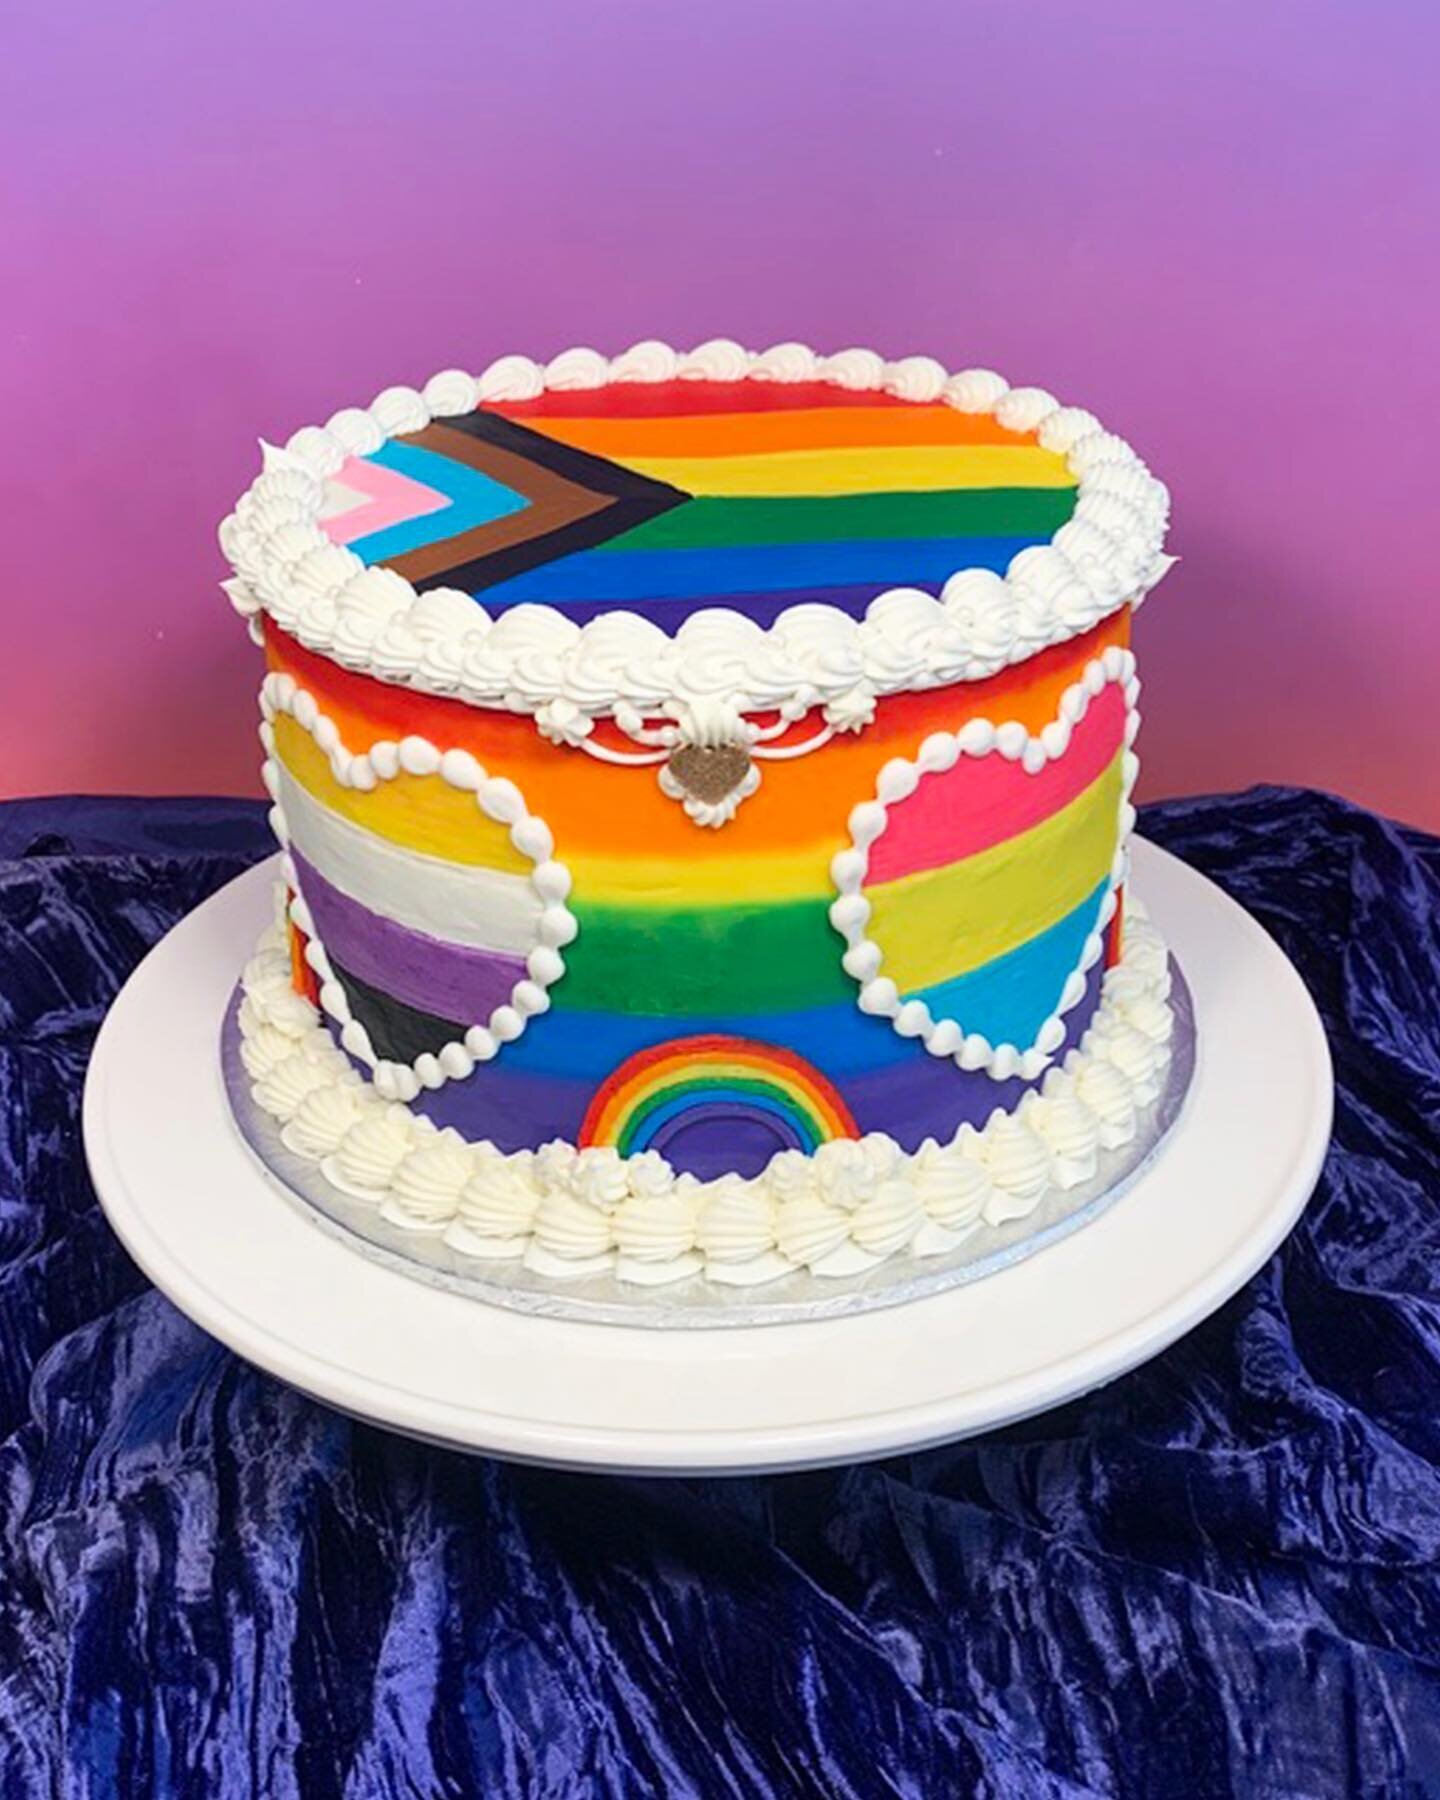 The cutest pride cake for the cutest pride party there ever was! 
Designed by @anaya_sup to feature a surprise rainbow interior and some choice flags for maximum guest stokage 🌈

Thank you SO MUCH to Jen for this beautiful order and for letting me l